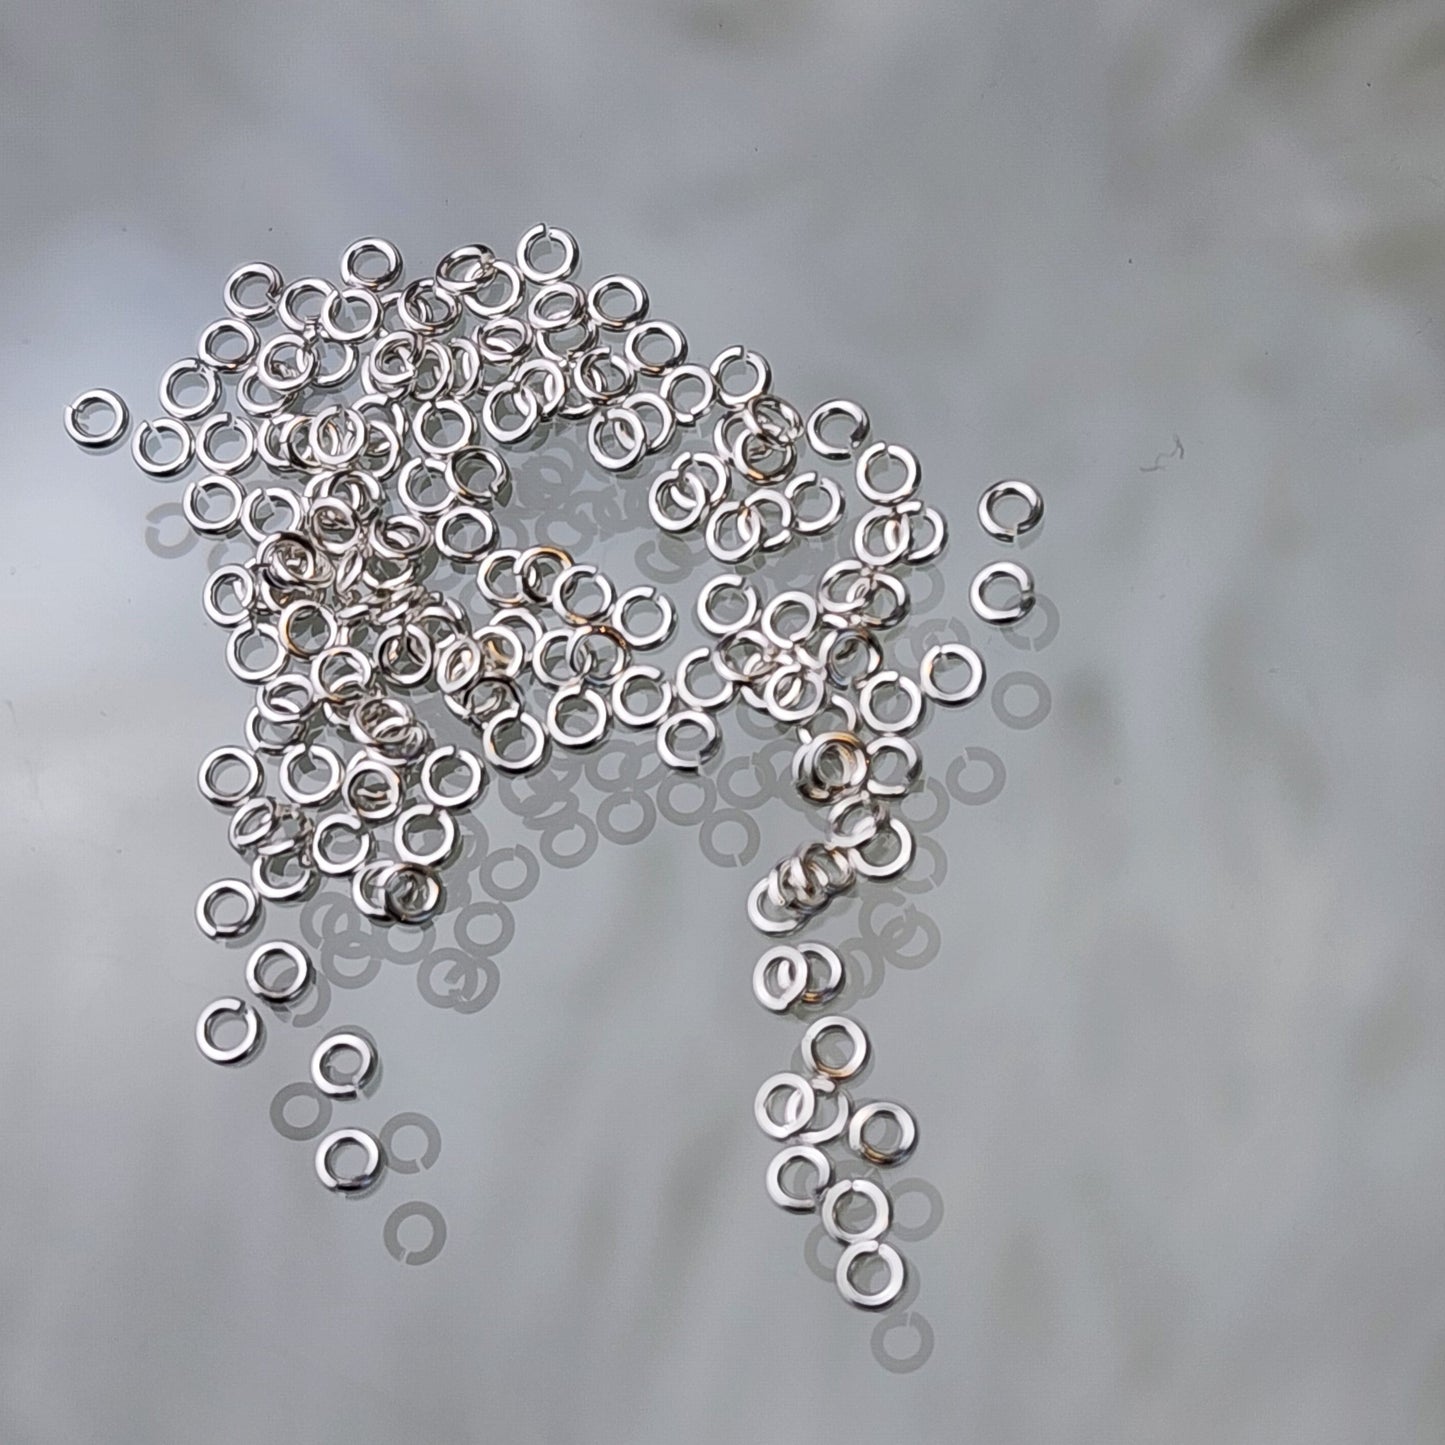 2.3 mm 24 gauge Jumprings Gold filled and Sterling silver Pack of 50